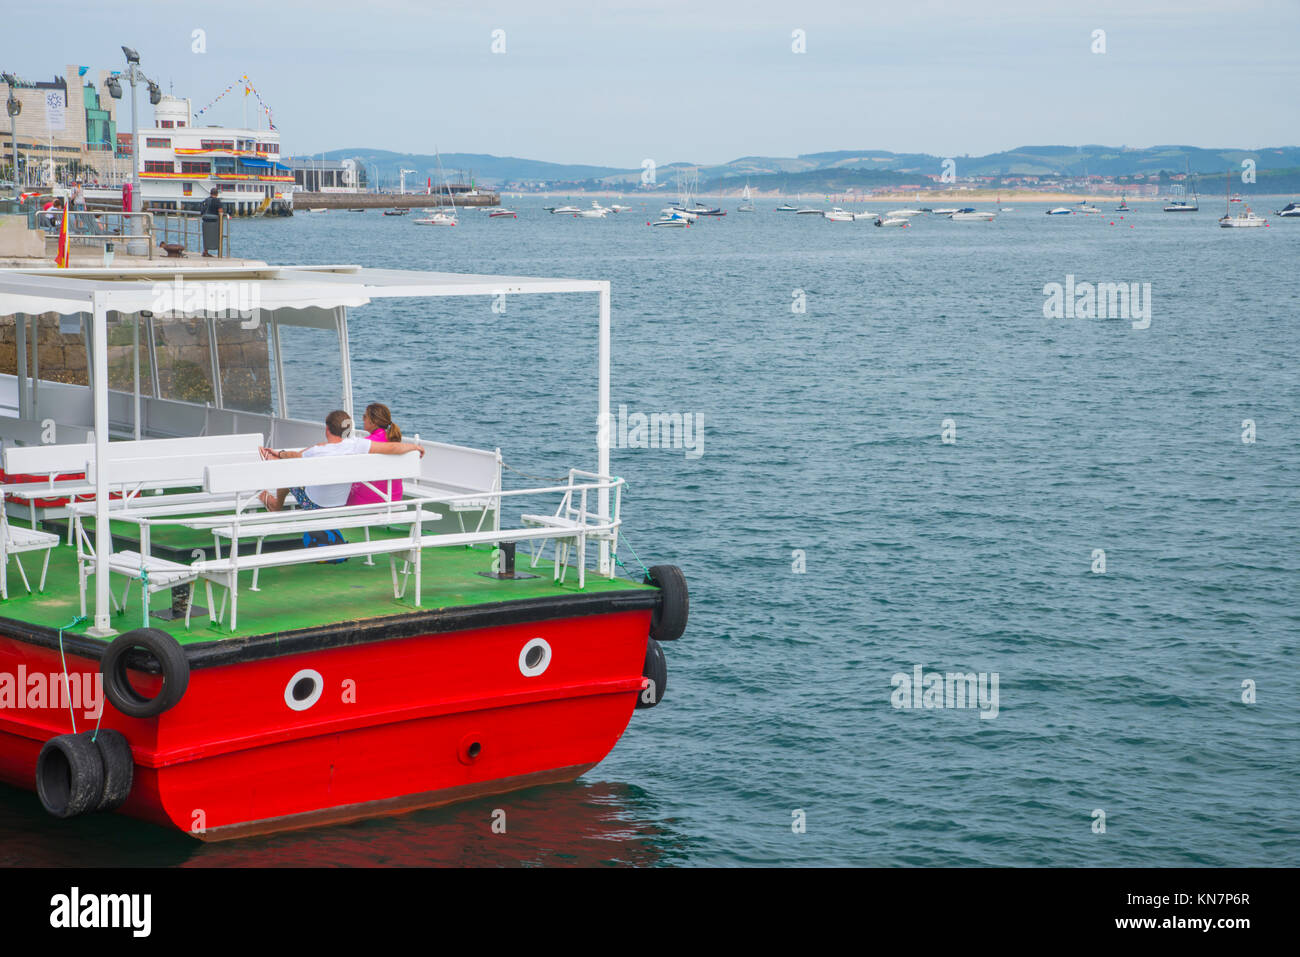 People in the boat waiting for a sea trip. Santander, Spain. Stock Photo